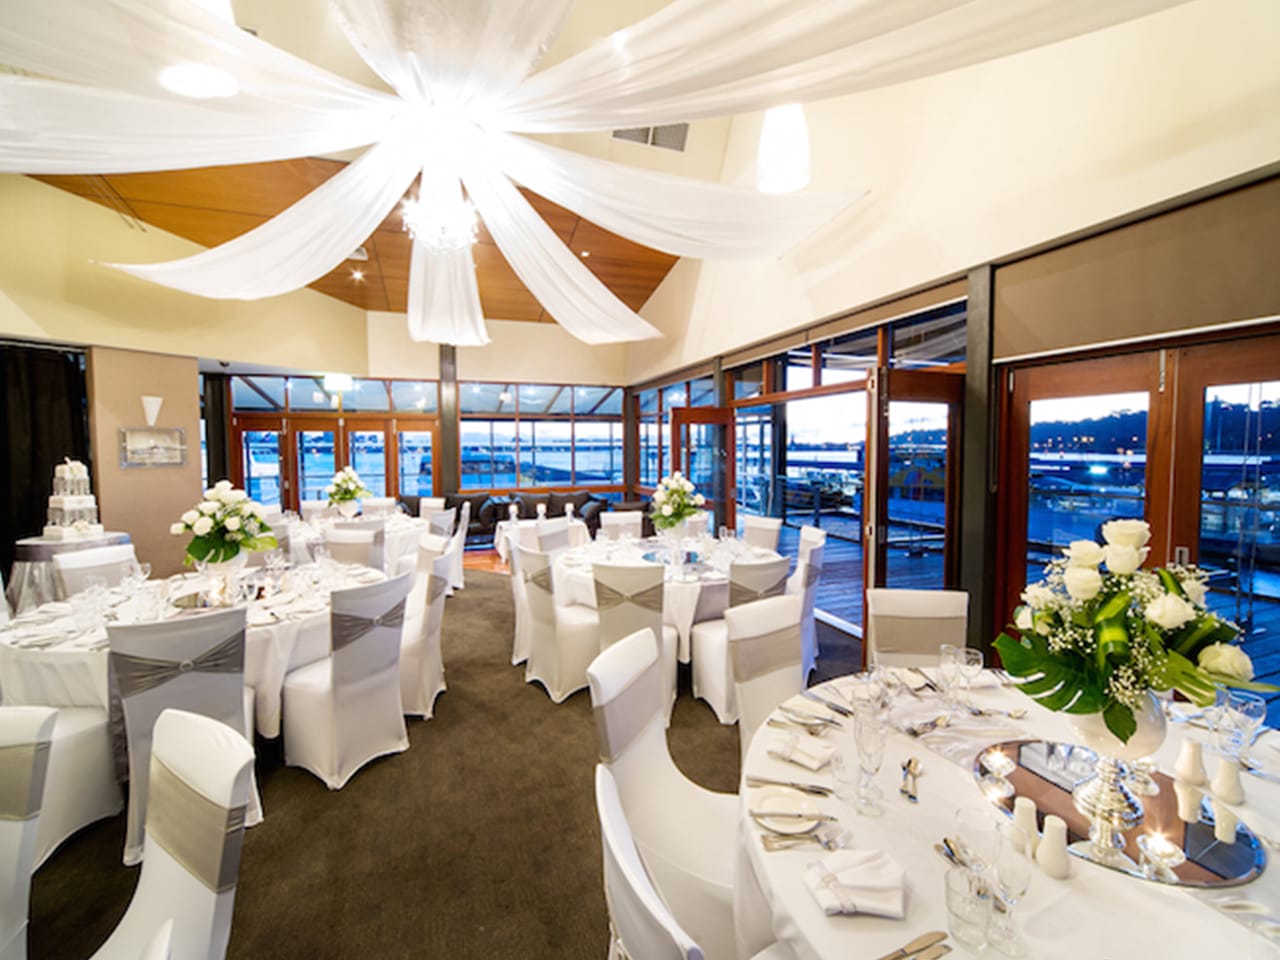 Chairs And Tables In Banquet Style Inside The Function Venue With Glass Windows And Ceiling Draping